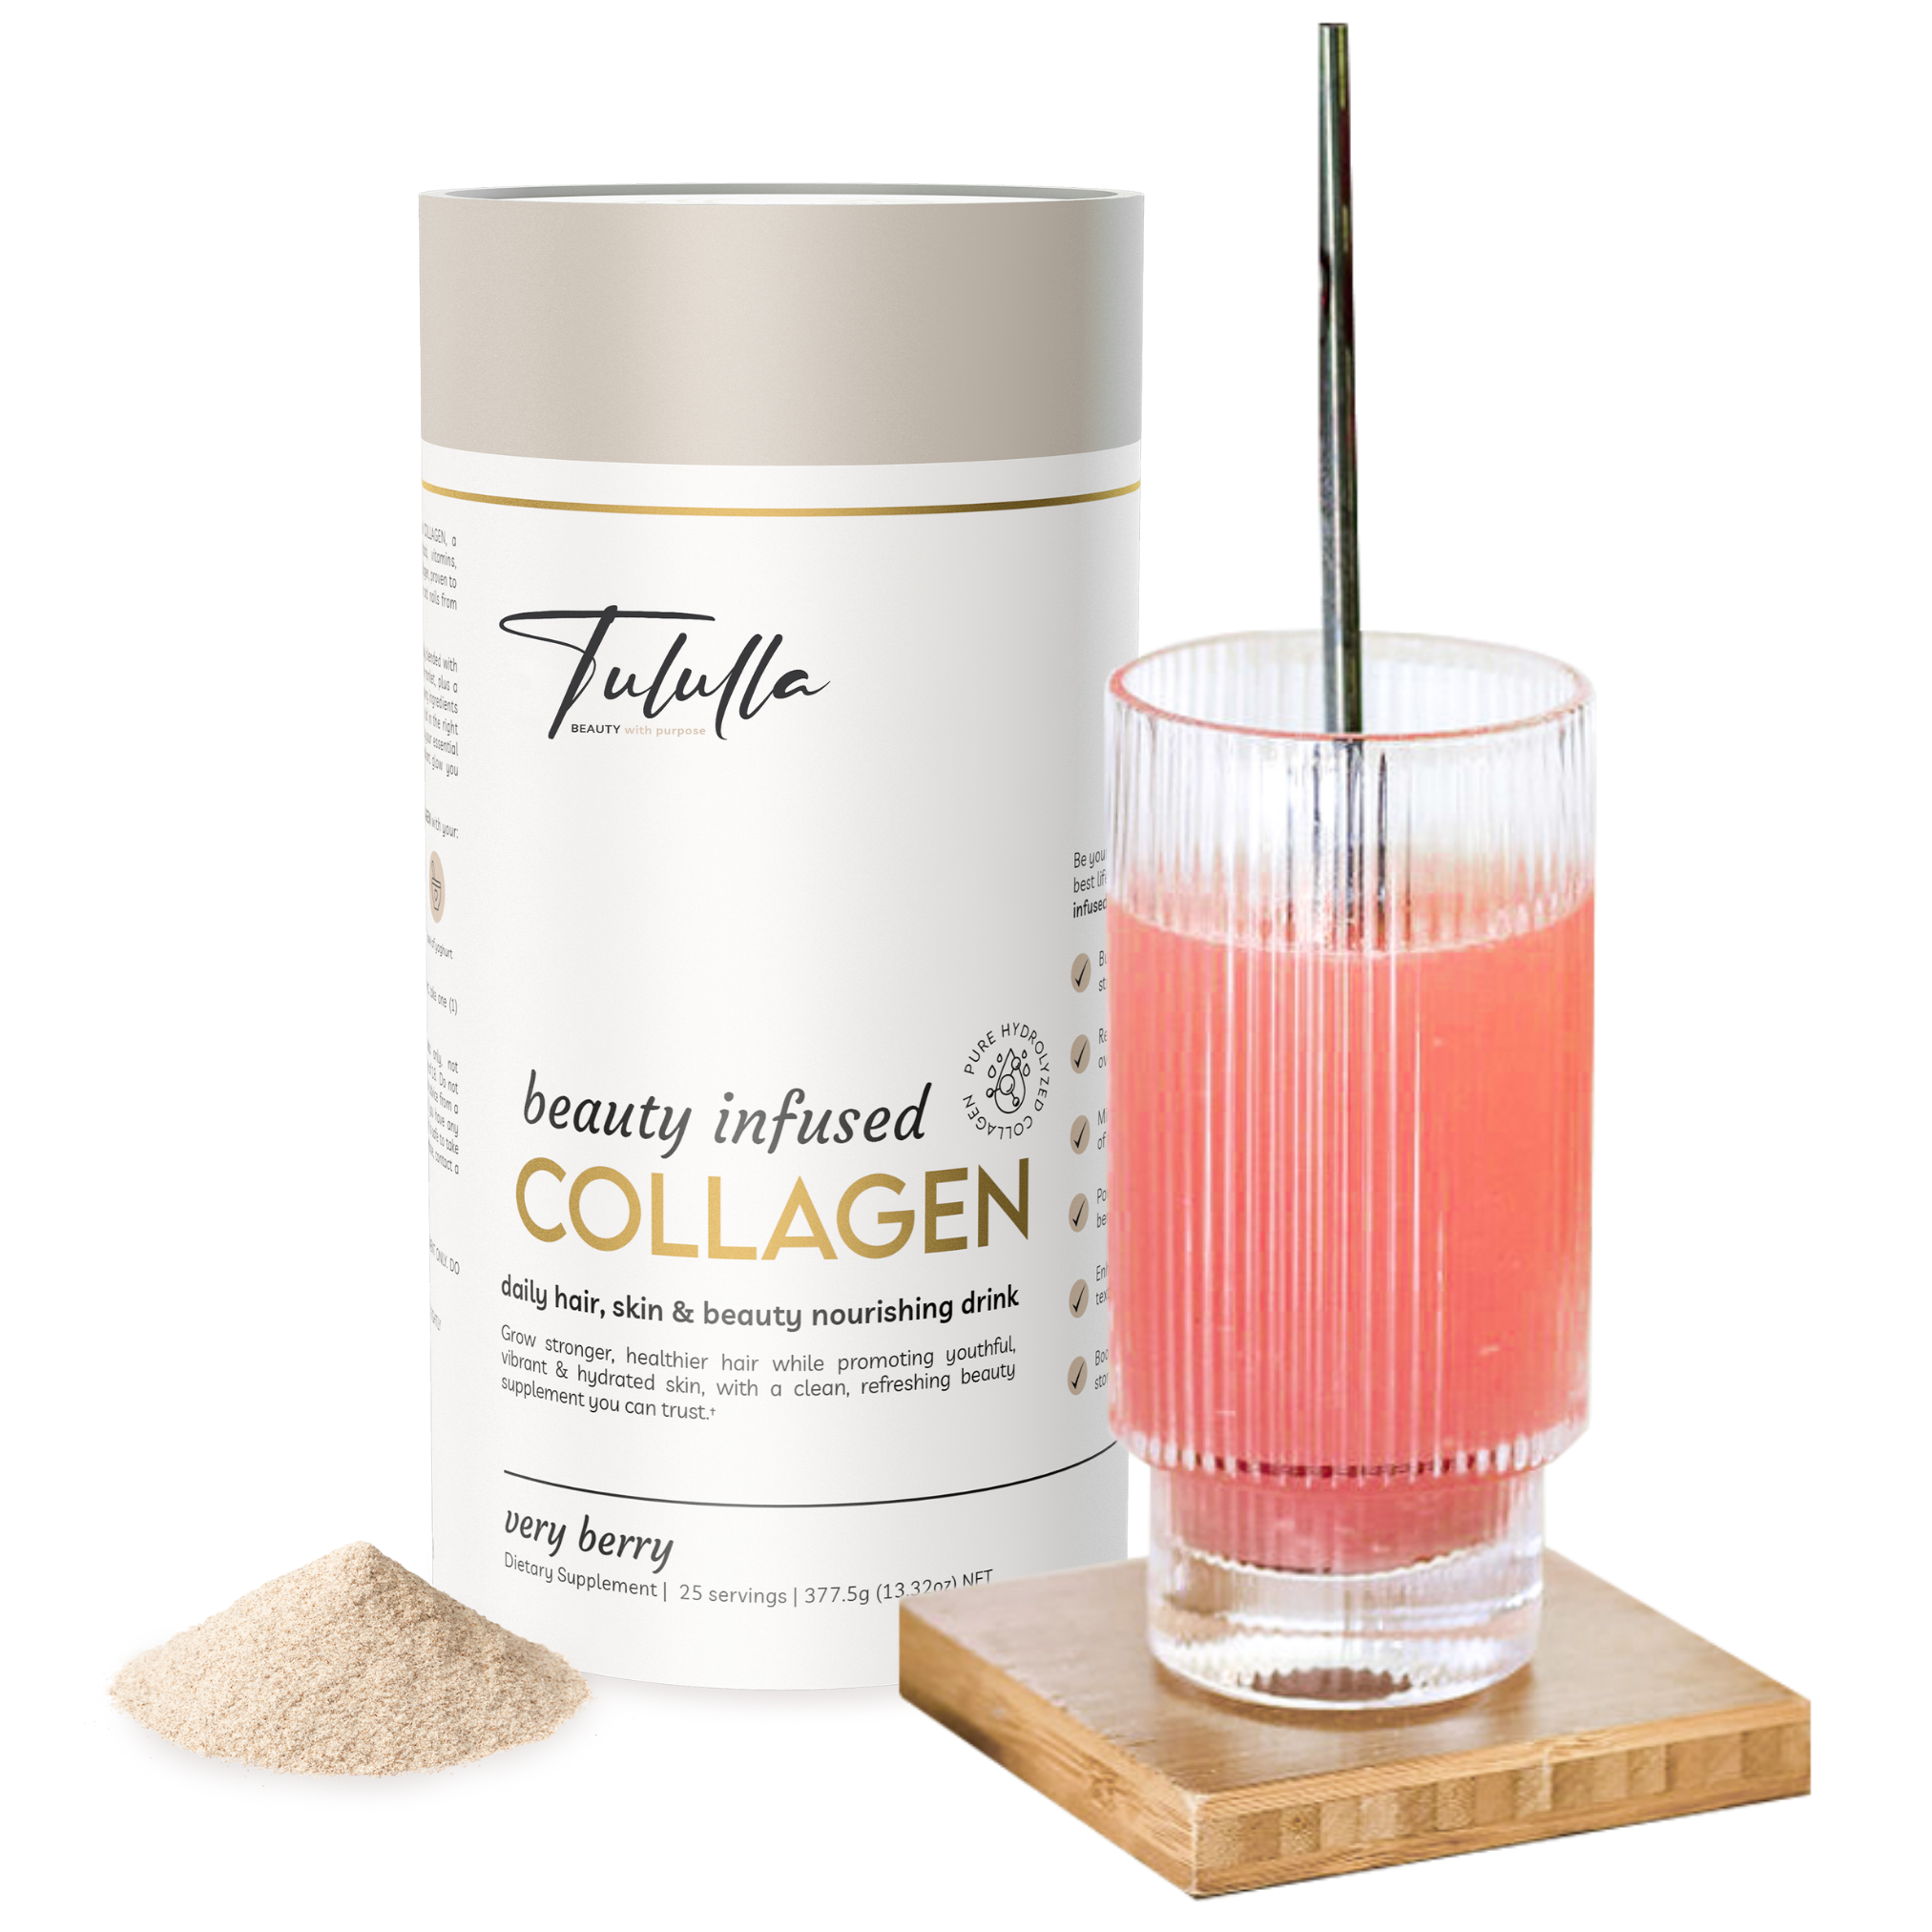 Tululla beauty infused COLLAGEN.png__PID:658756ba-66bc-49da-9df5-99e04b180780